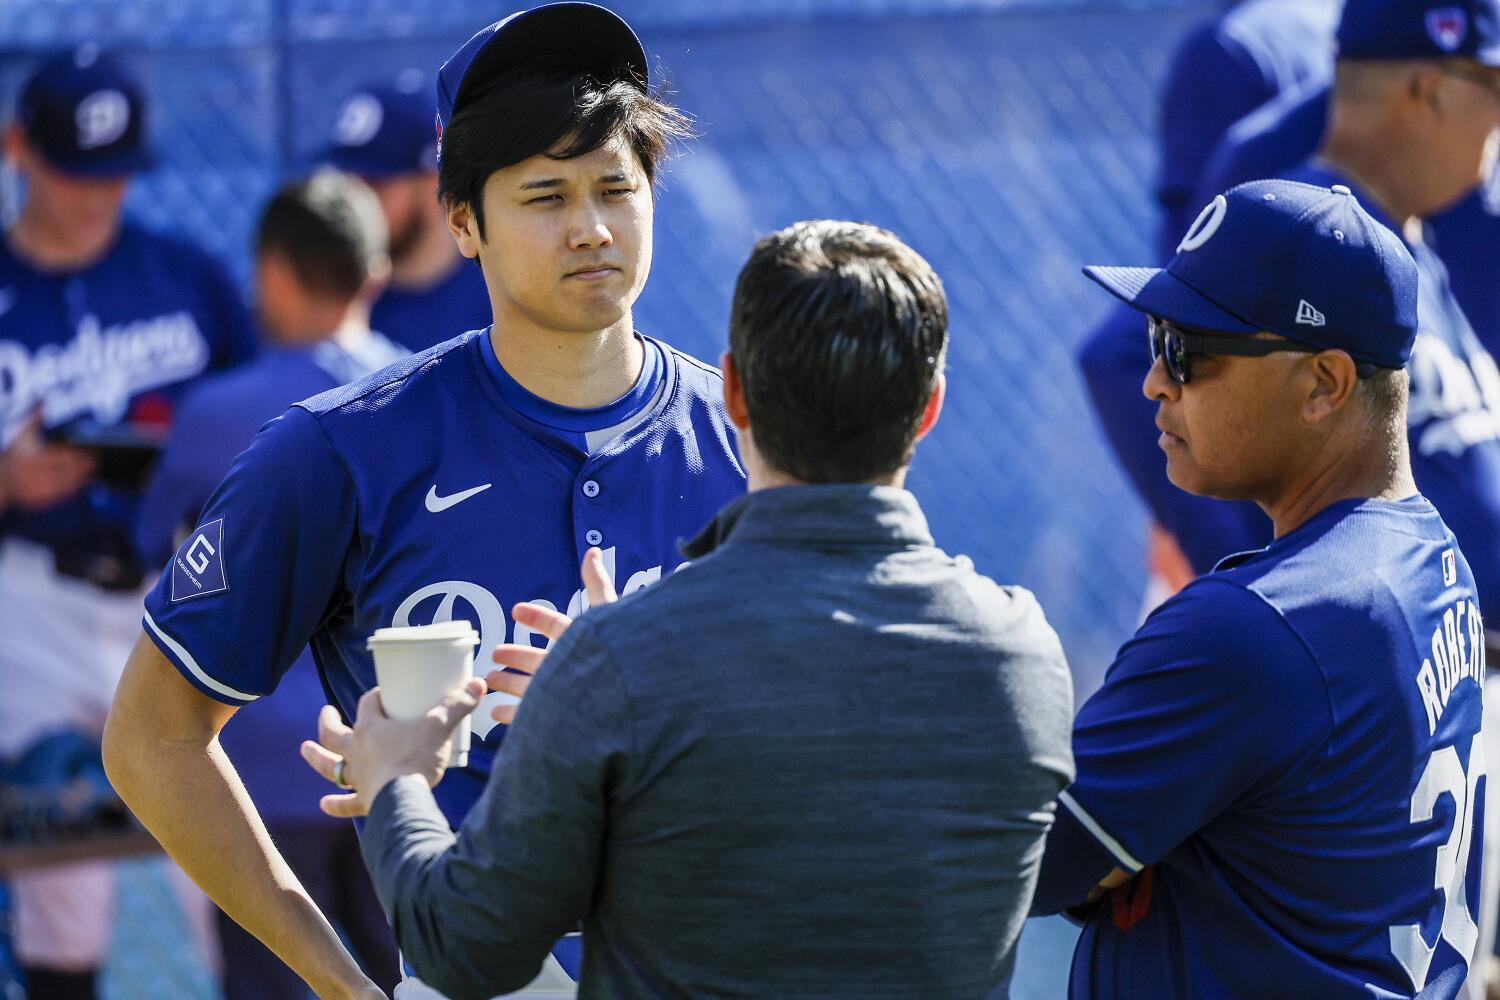 Minus 'buffer' of Ippei Mizuhara, Dodgers  engaging more directly with Shohei Ohtani